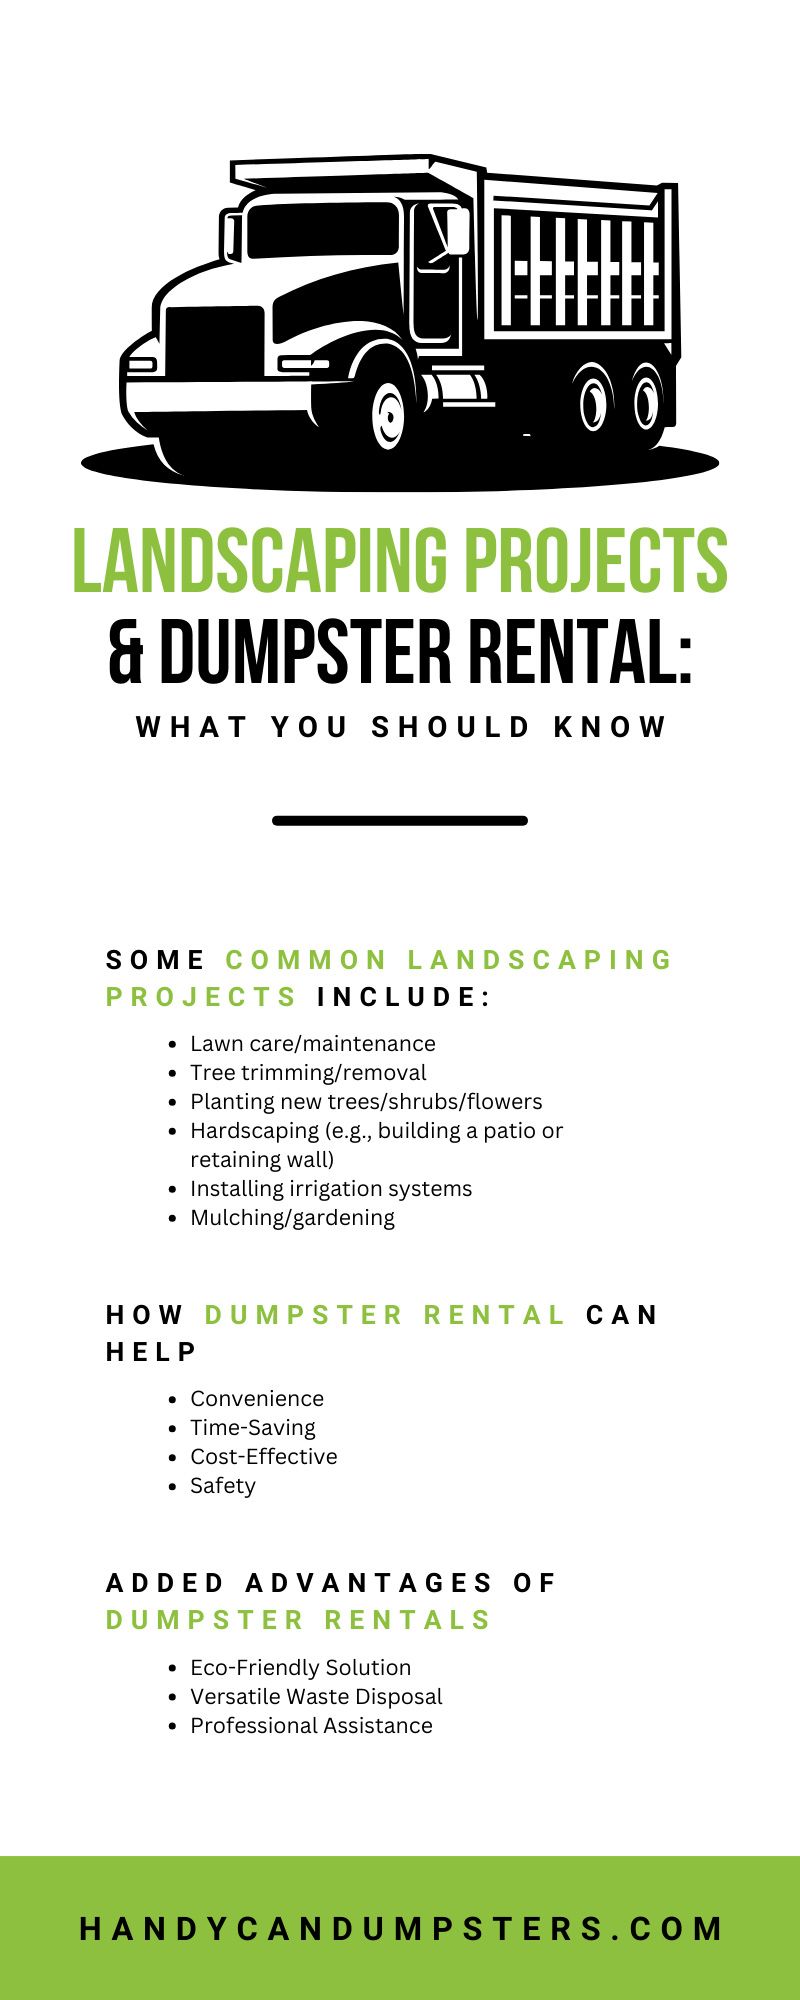 Landscaping Projects & Dumpster Rental: What You Should Know